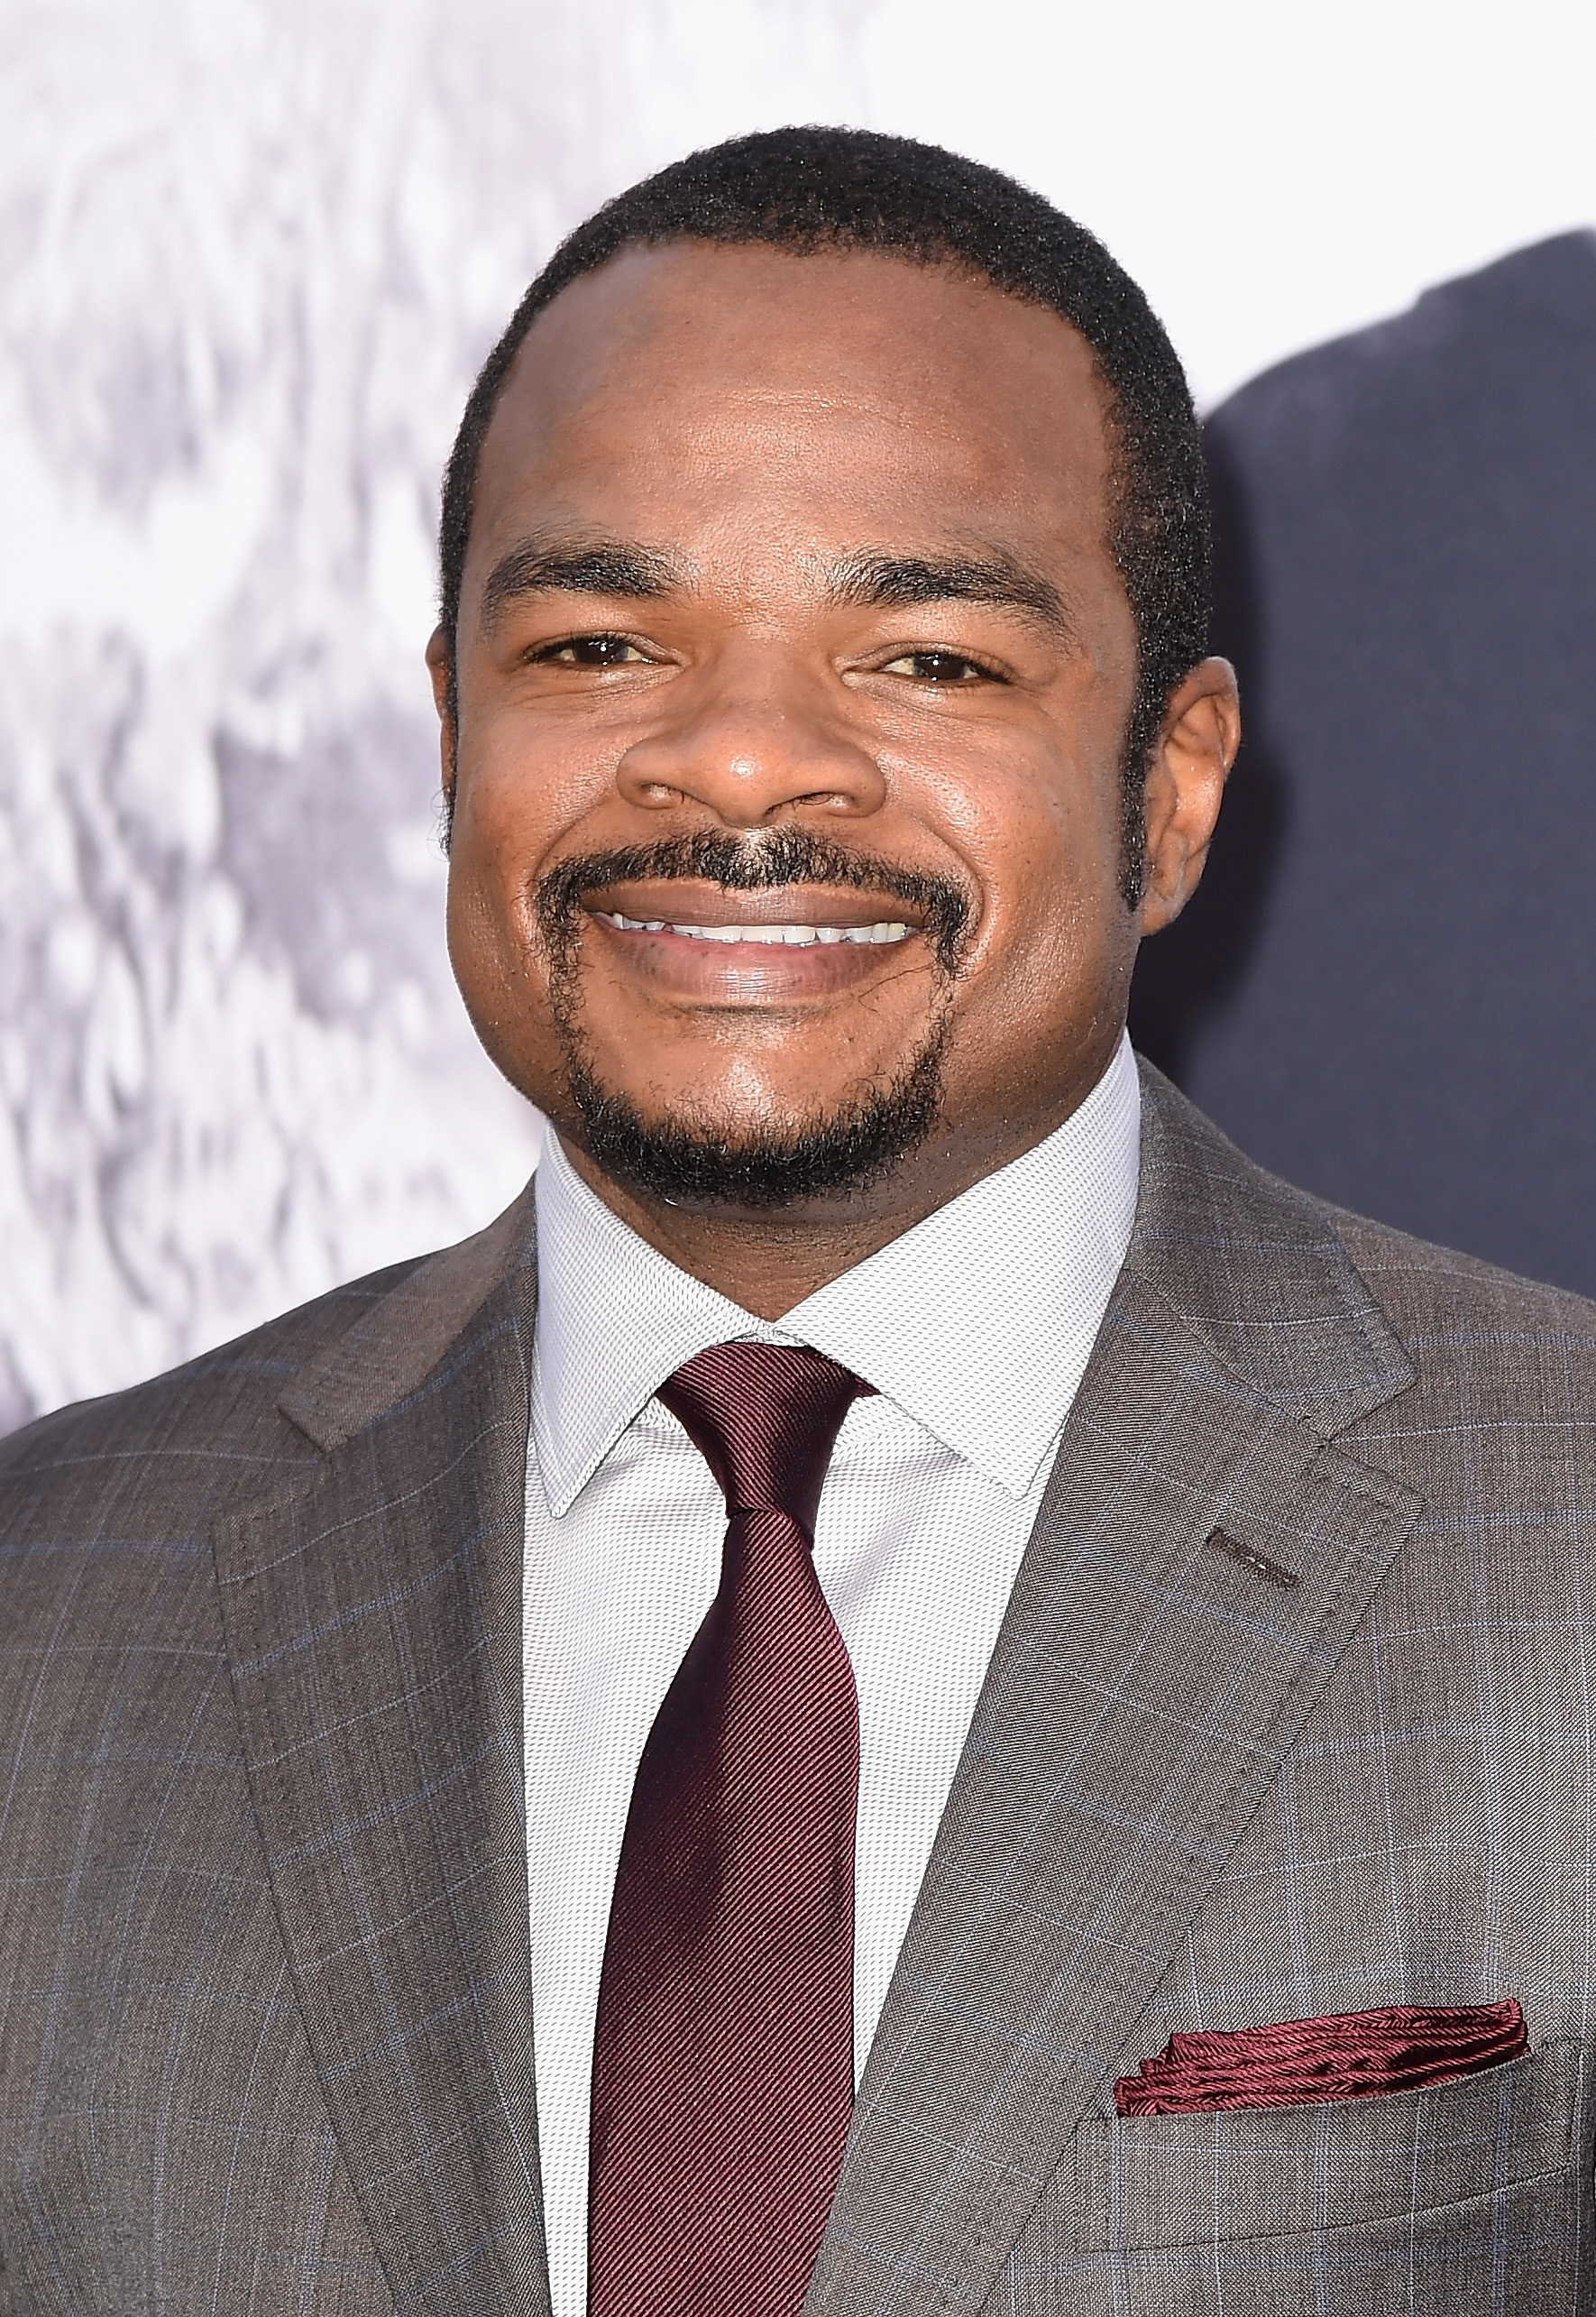 F. Gary Gray at the premiere of "Straight Outta Compton" in Los Angeles on Aug. 10, 2015. (Kevin Winter—Getty Images)